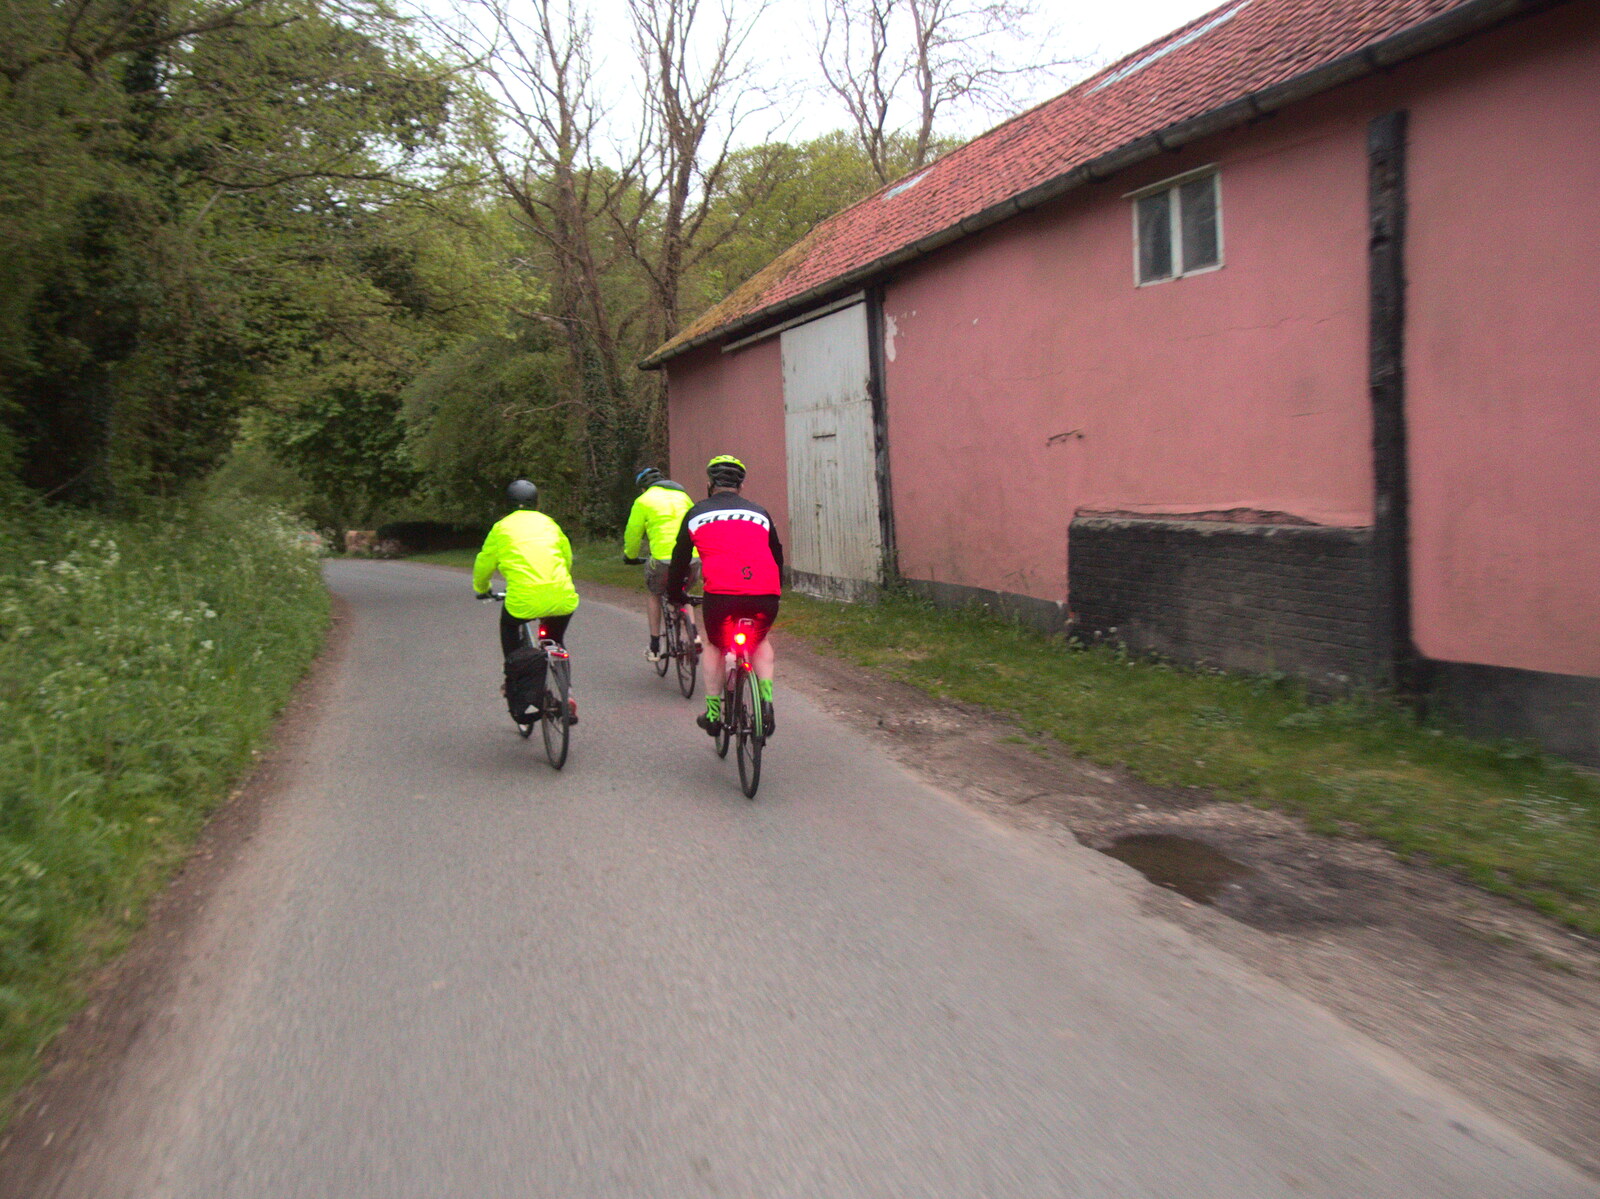 Passing a pink barn near Syleham from The BSCC at the King's Head, Brockdish, Norfolk - 13th May 2021